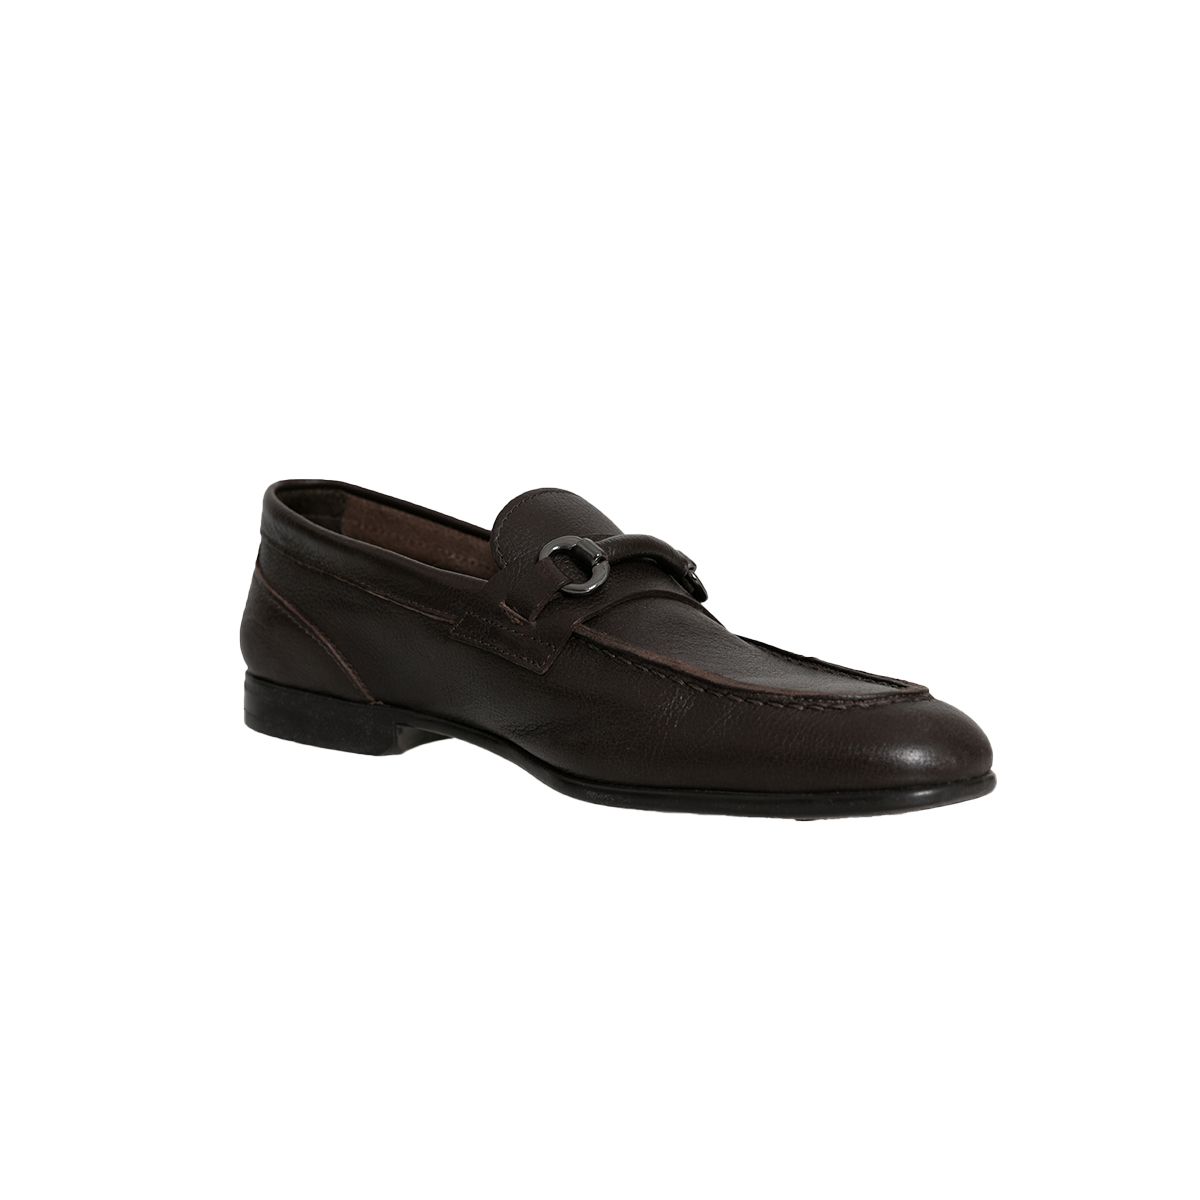 Brown Leather Loafers With Silver-Tone Hardware